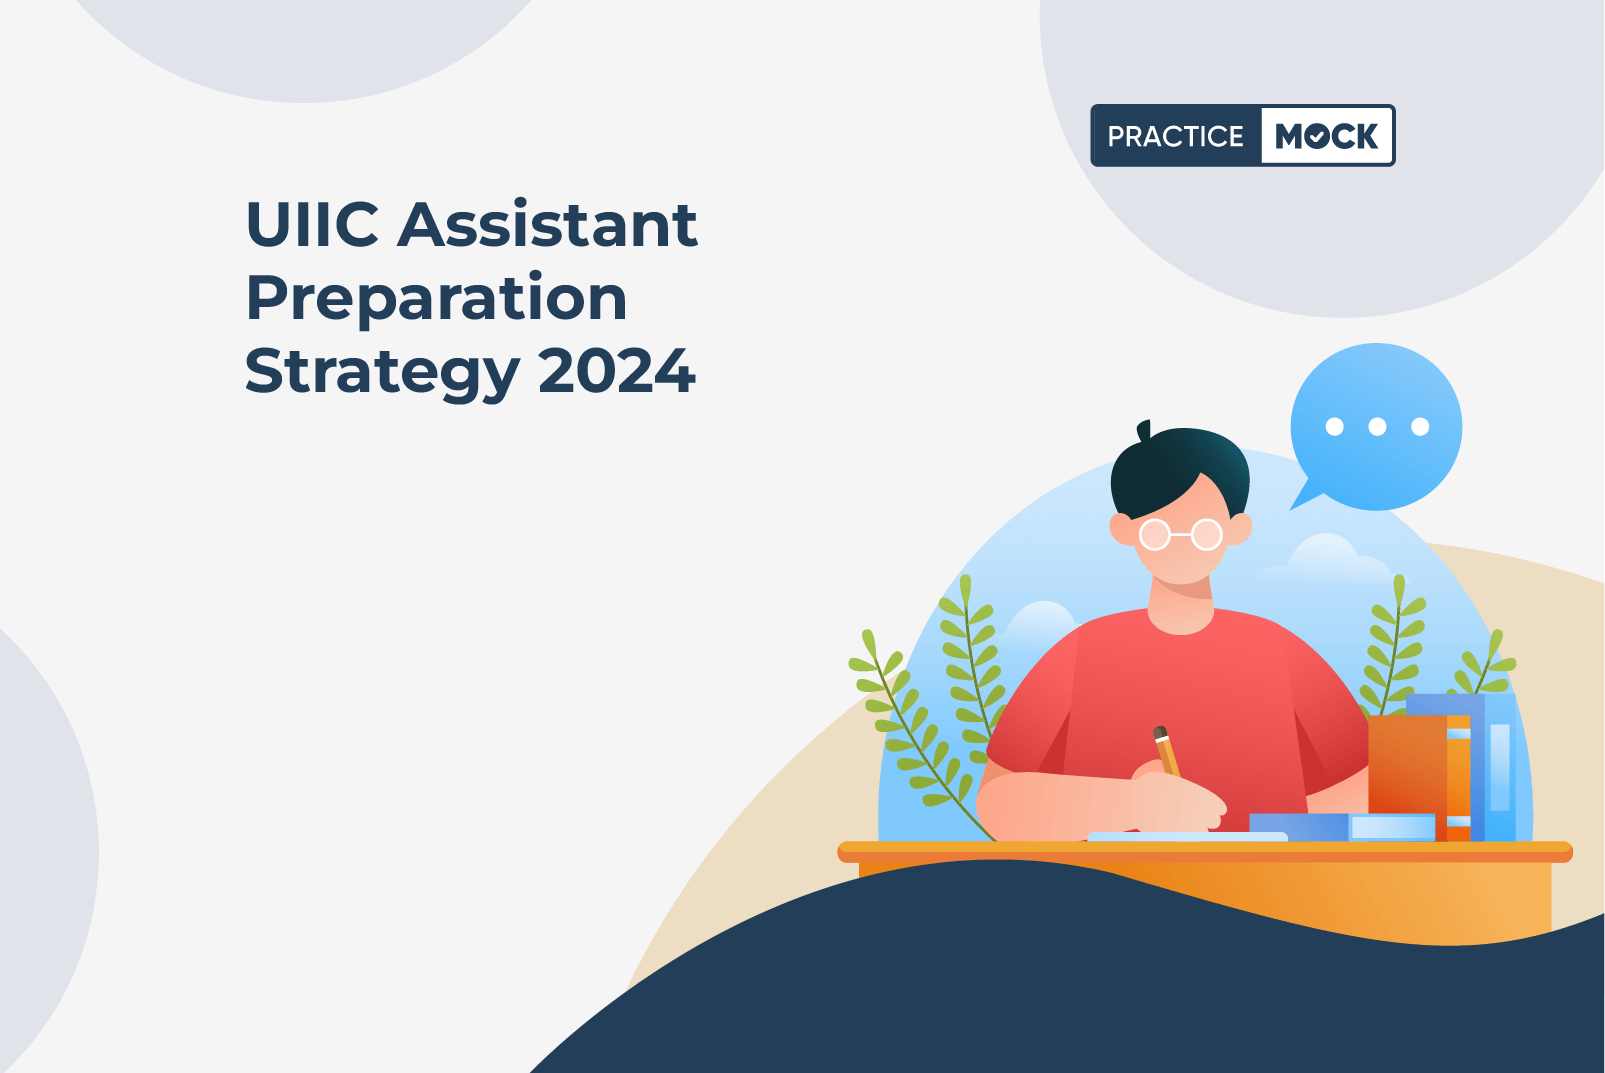 UIIC Assistant Preparation Strategy 2024